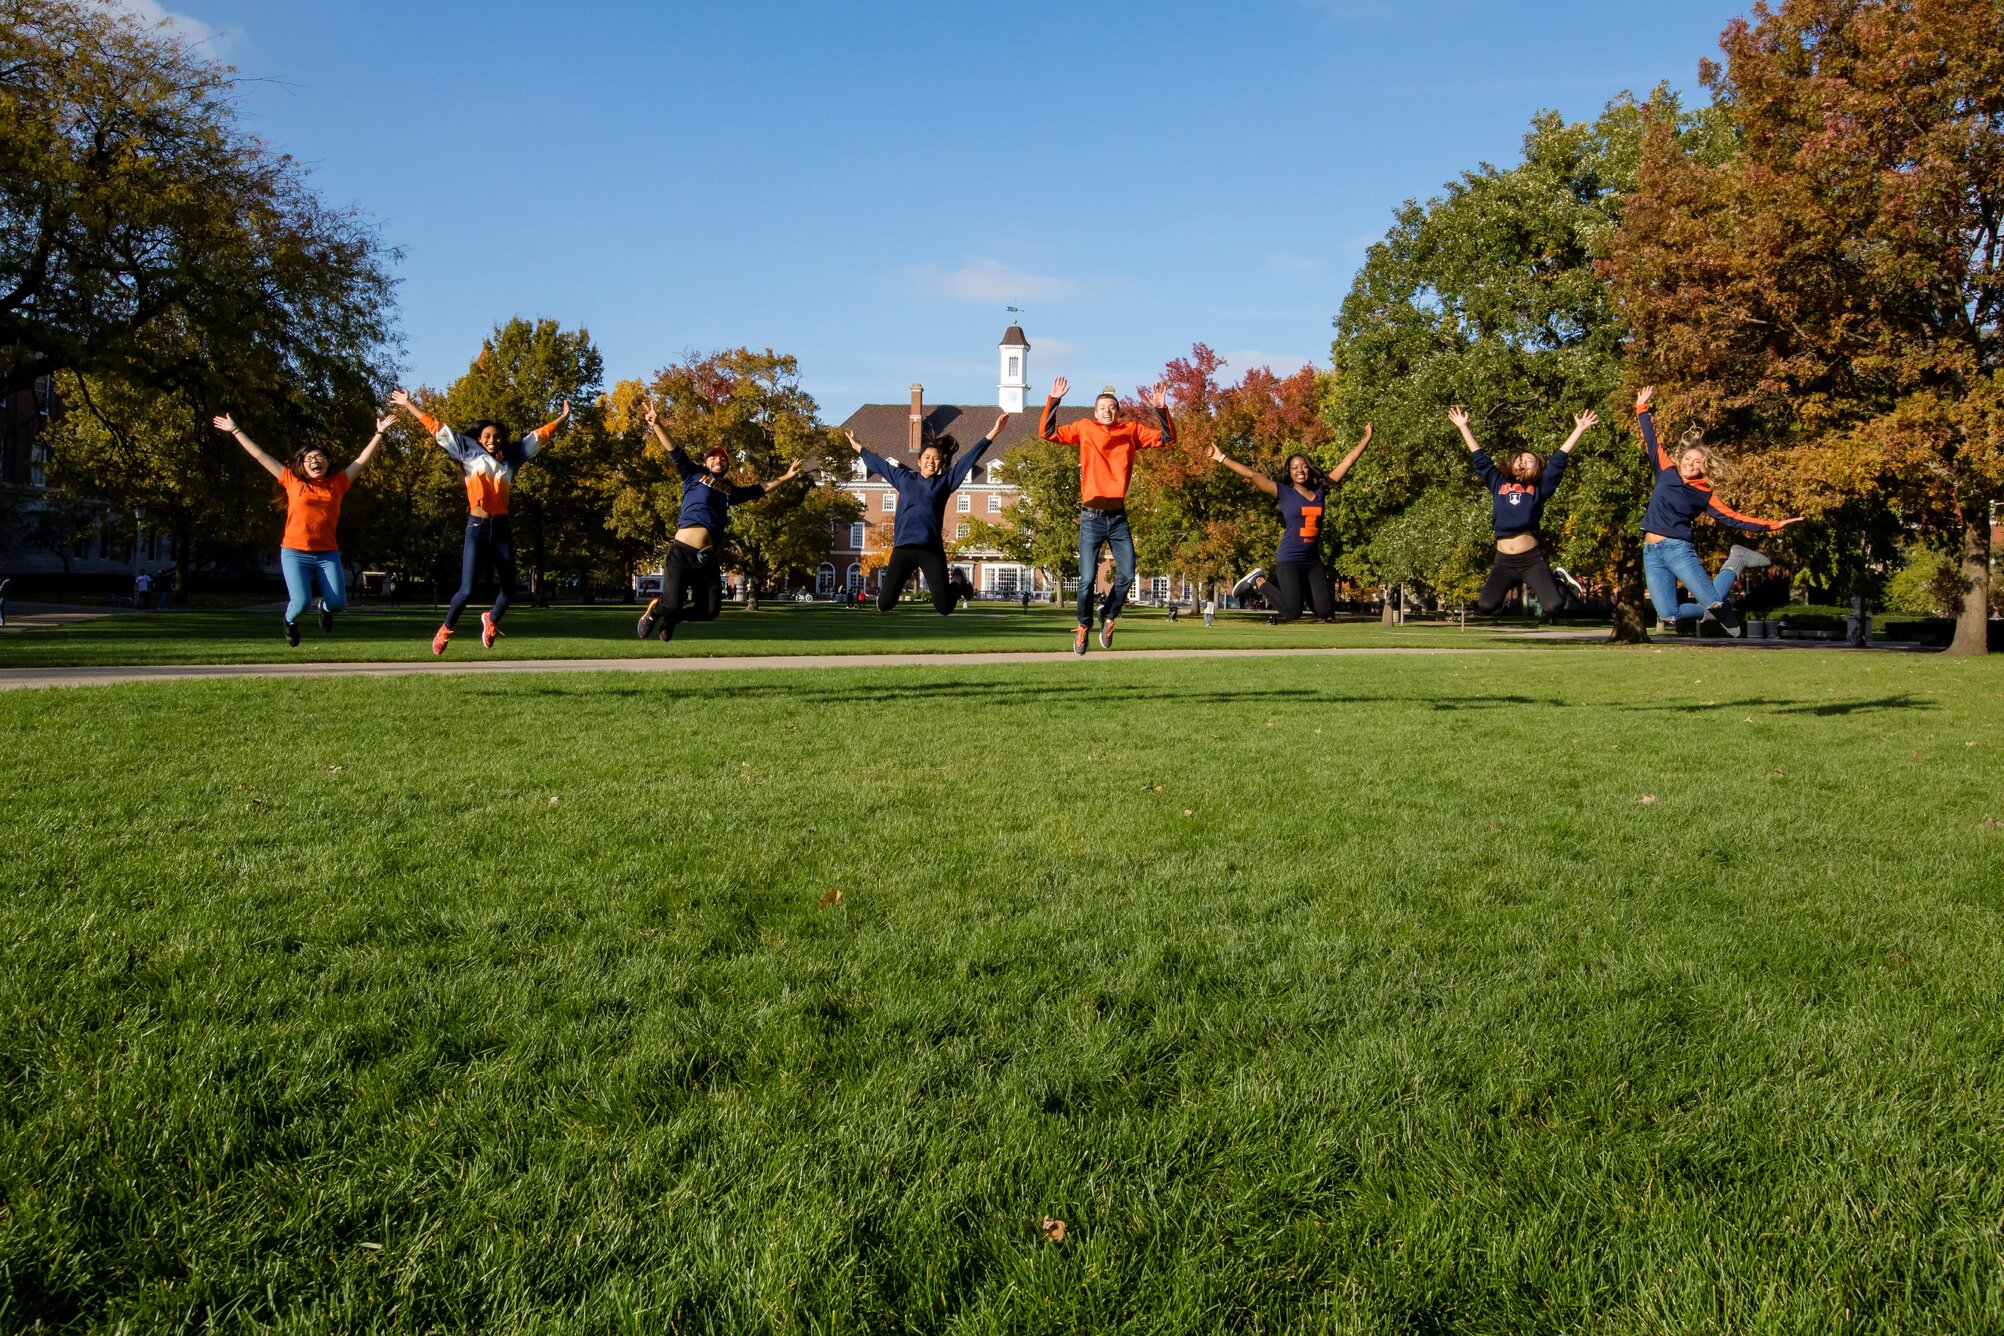 Diverse group of students wearing Illini gear jumping in the air on the quad in front of the Illini Union building, with trees beginning to turn to Fall colors